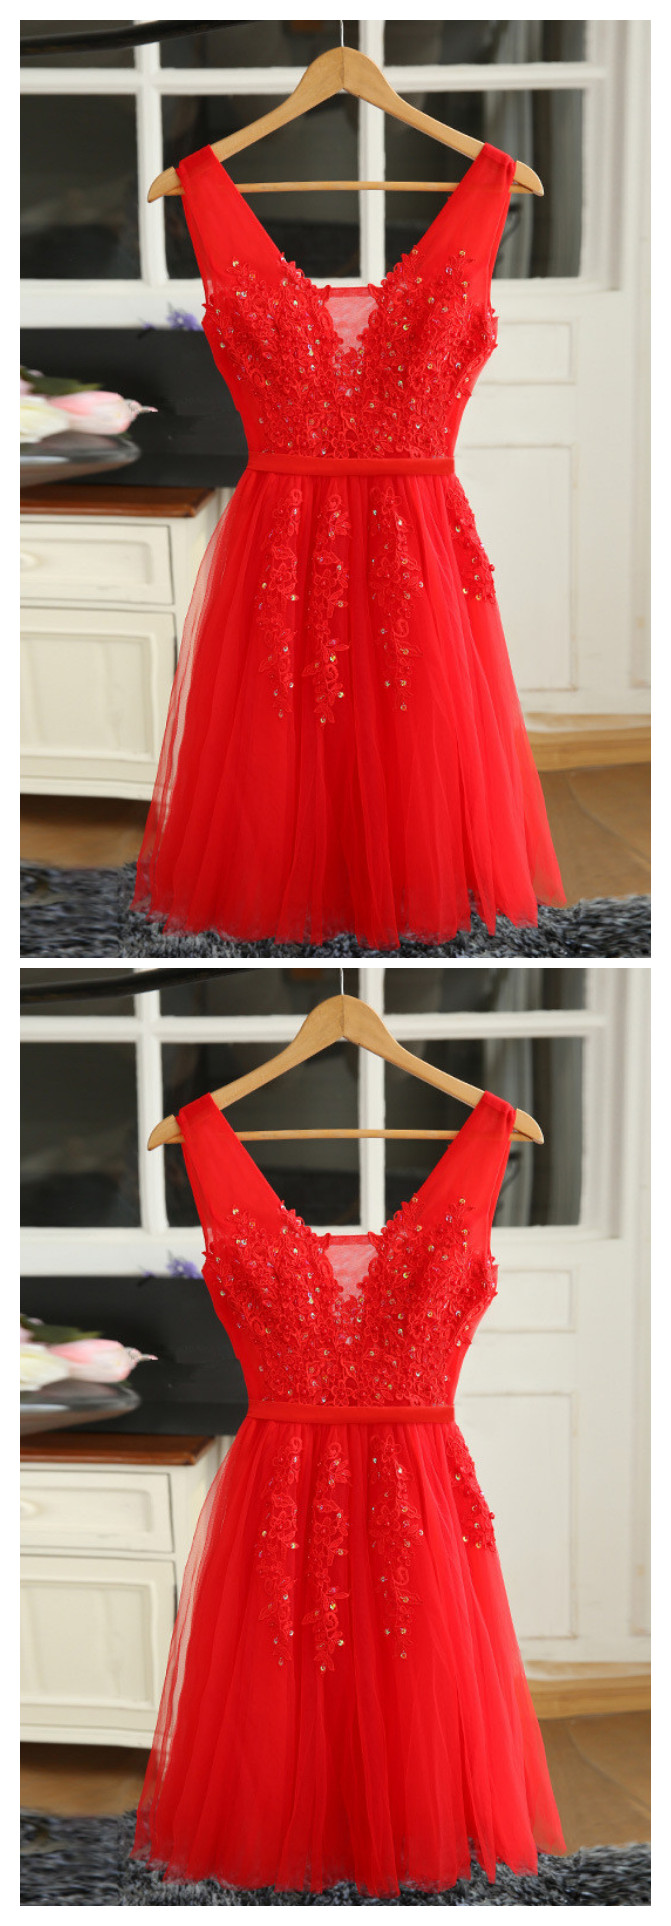 Cute A-line Red Knee Length Party Dress 2020, Short Homecoming Dresses